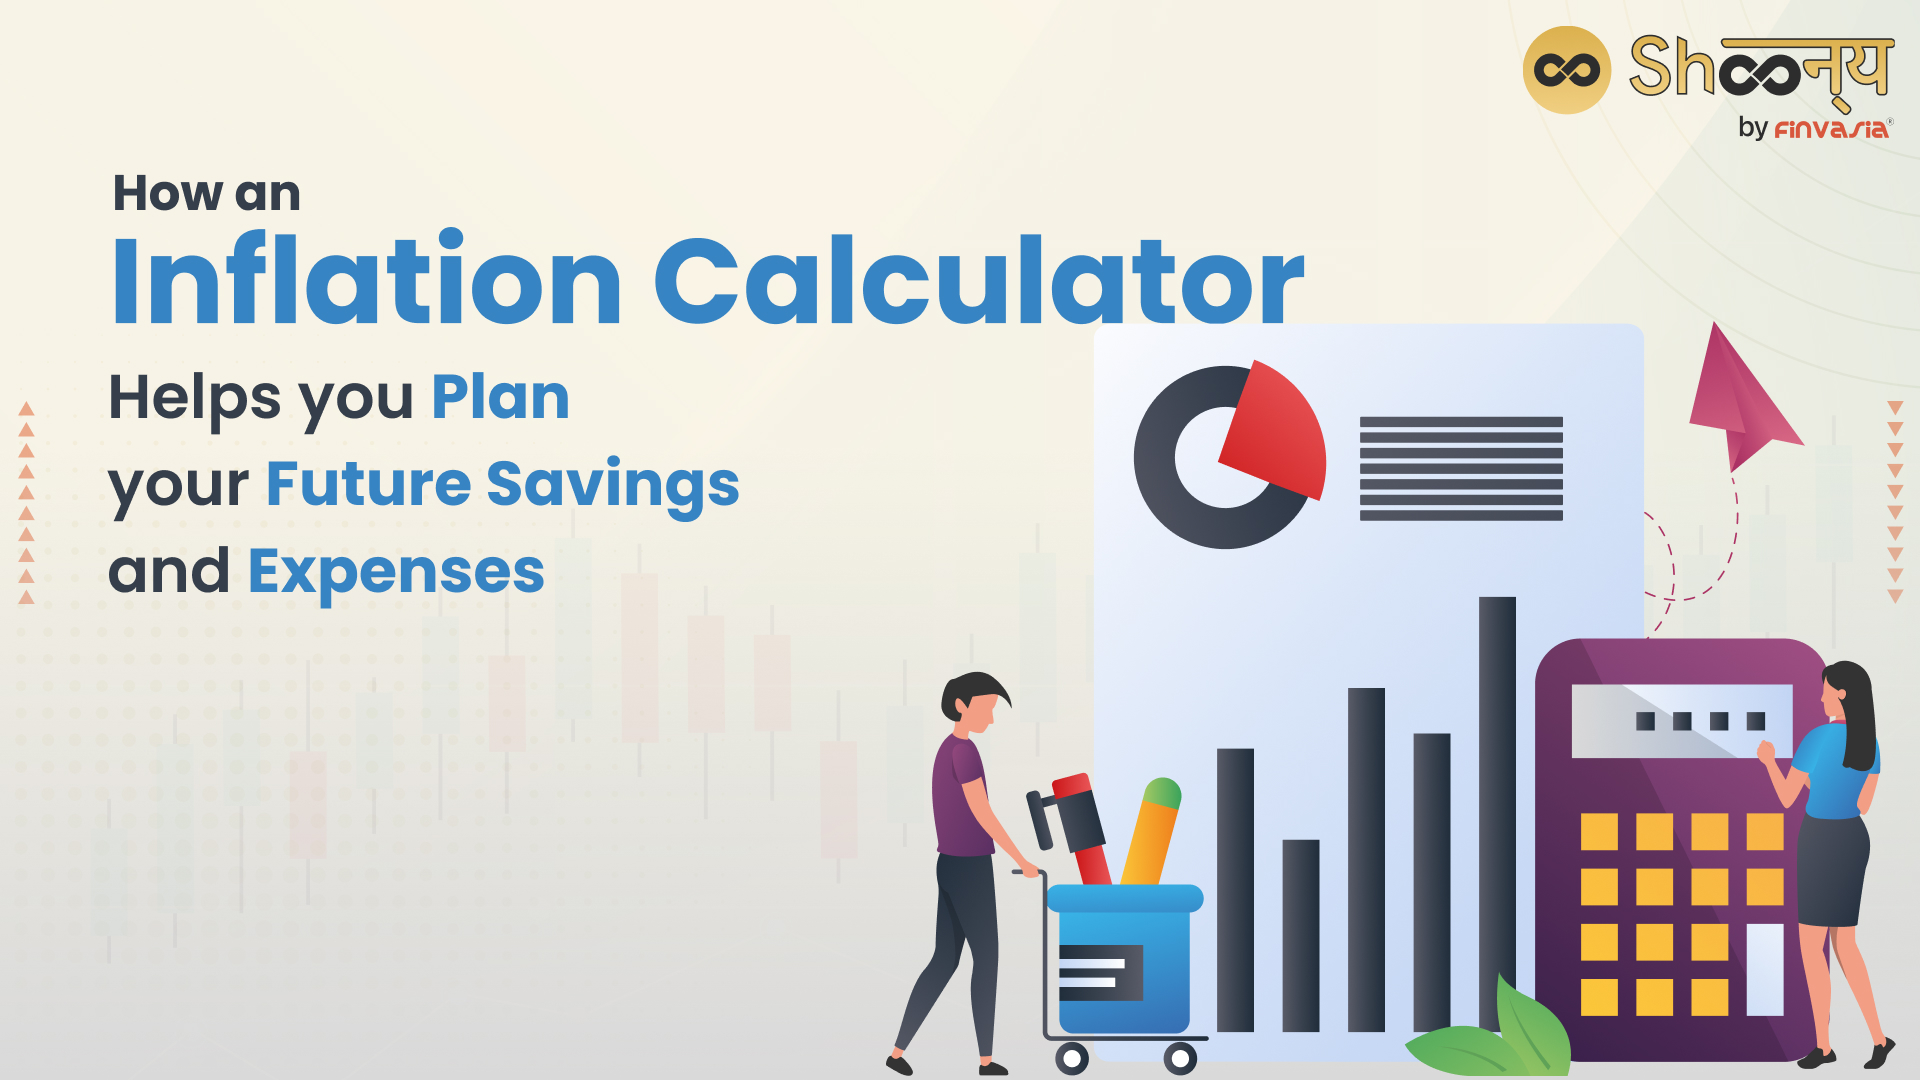 
  Inflation Calculator| What are the Benefits of Inflation Calculator